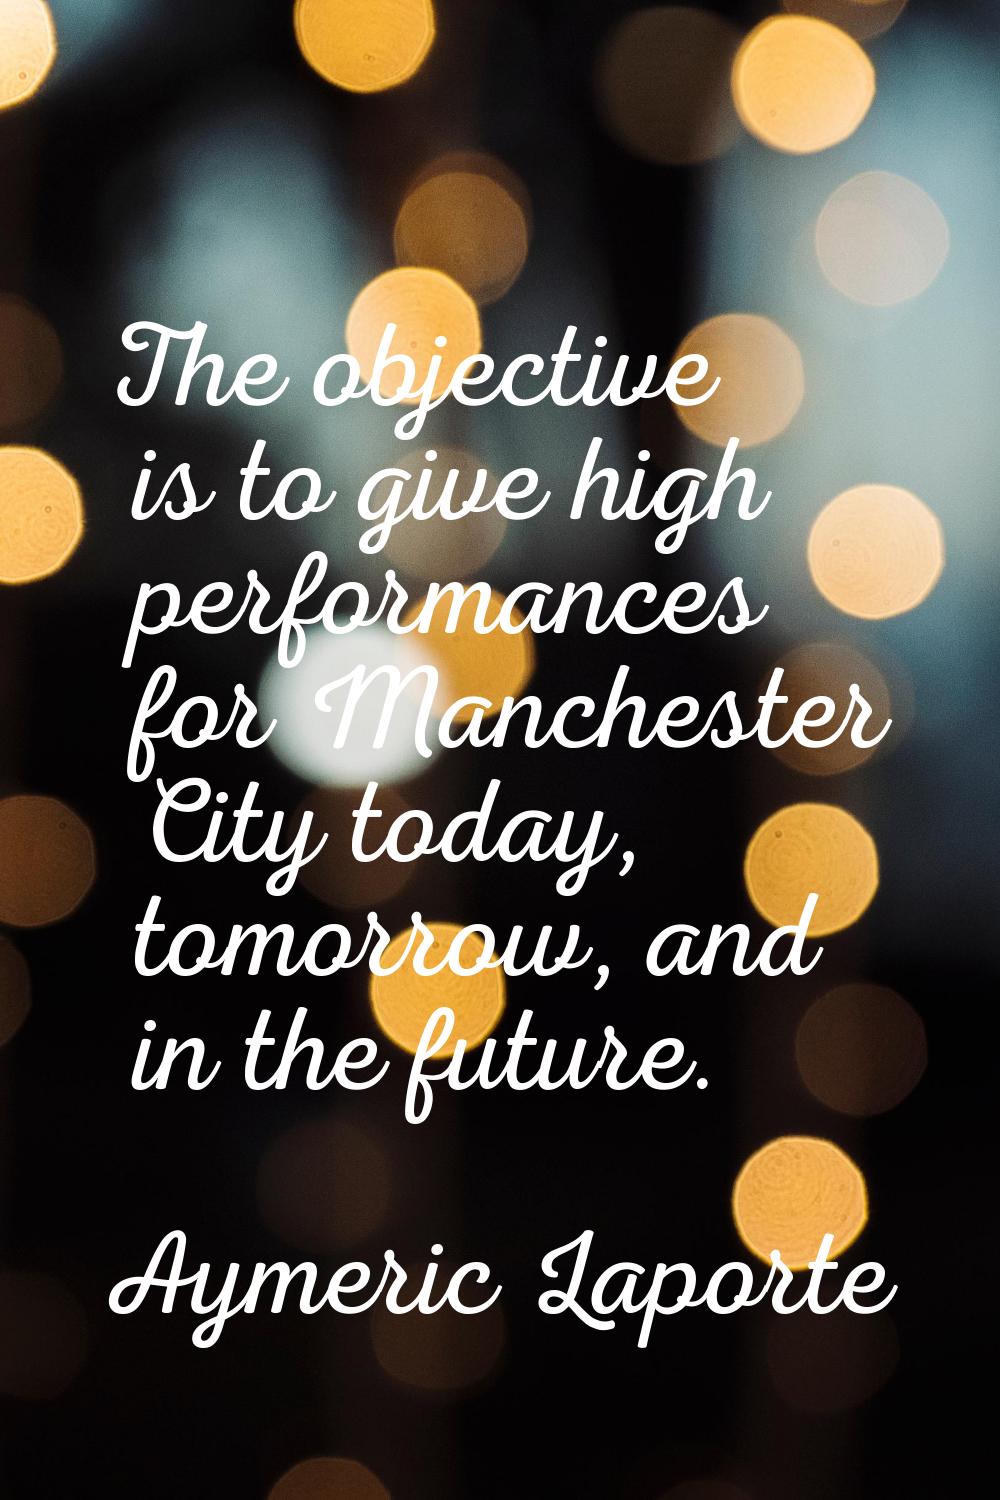 The objective is to give high performances for Manchester City today, tomorrow, and in the future.